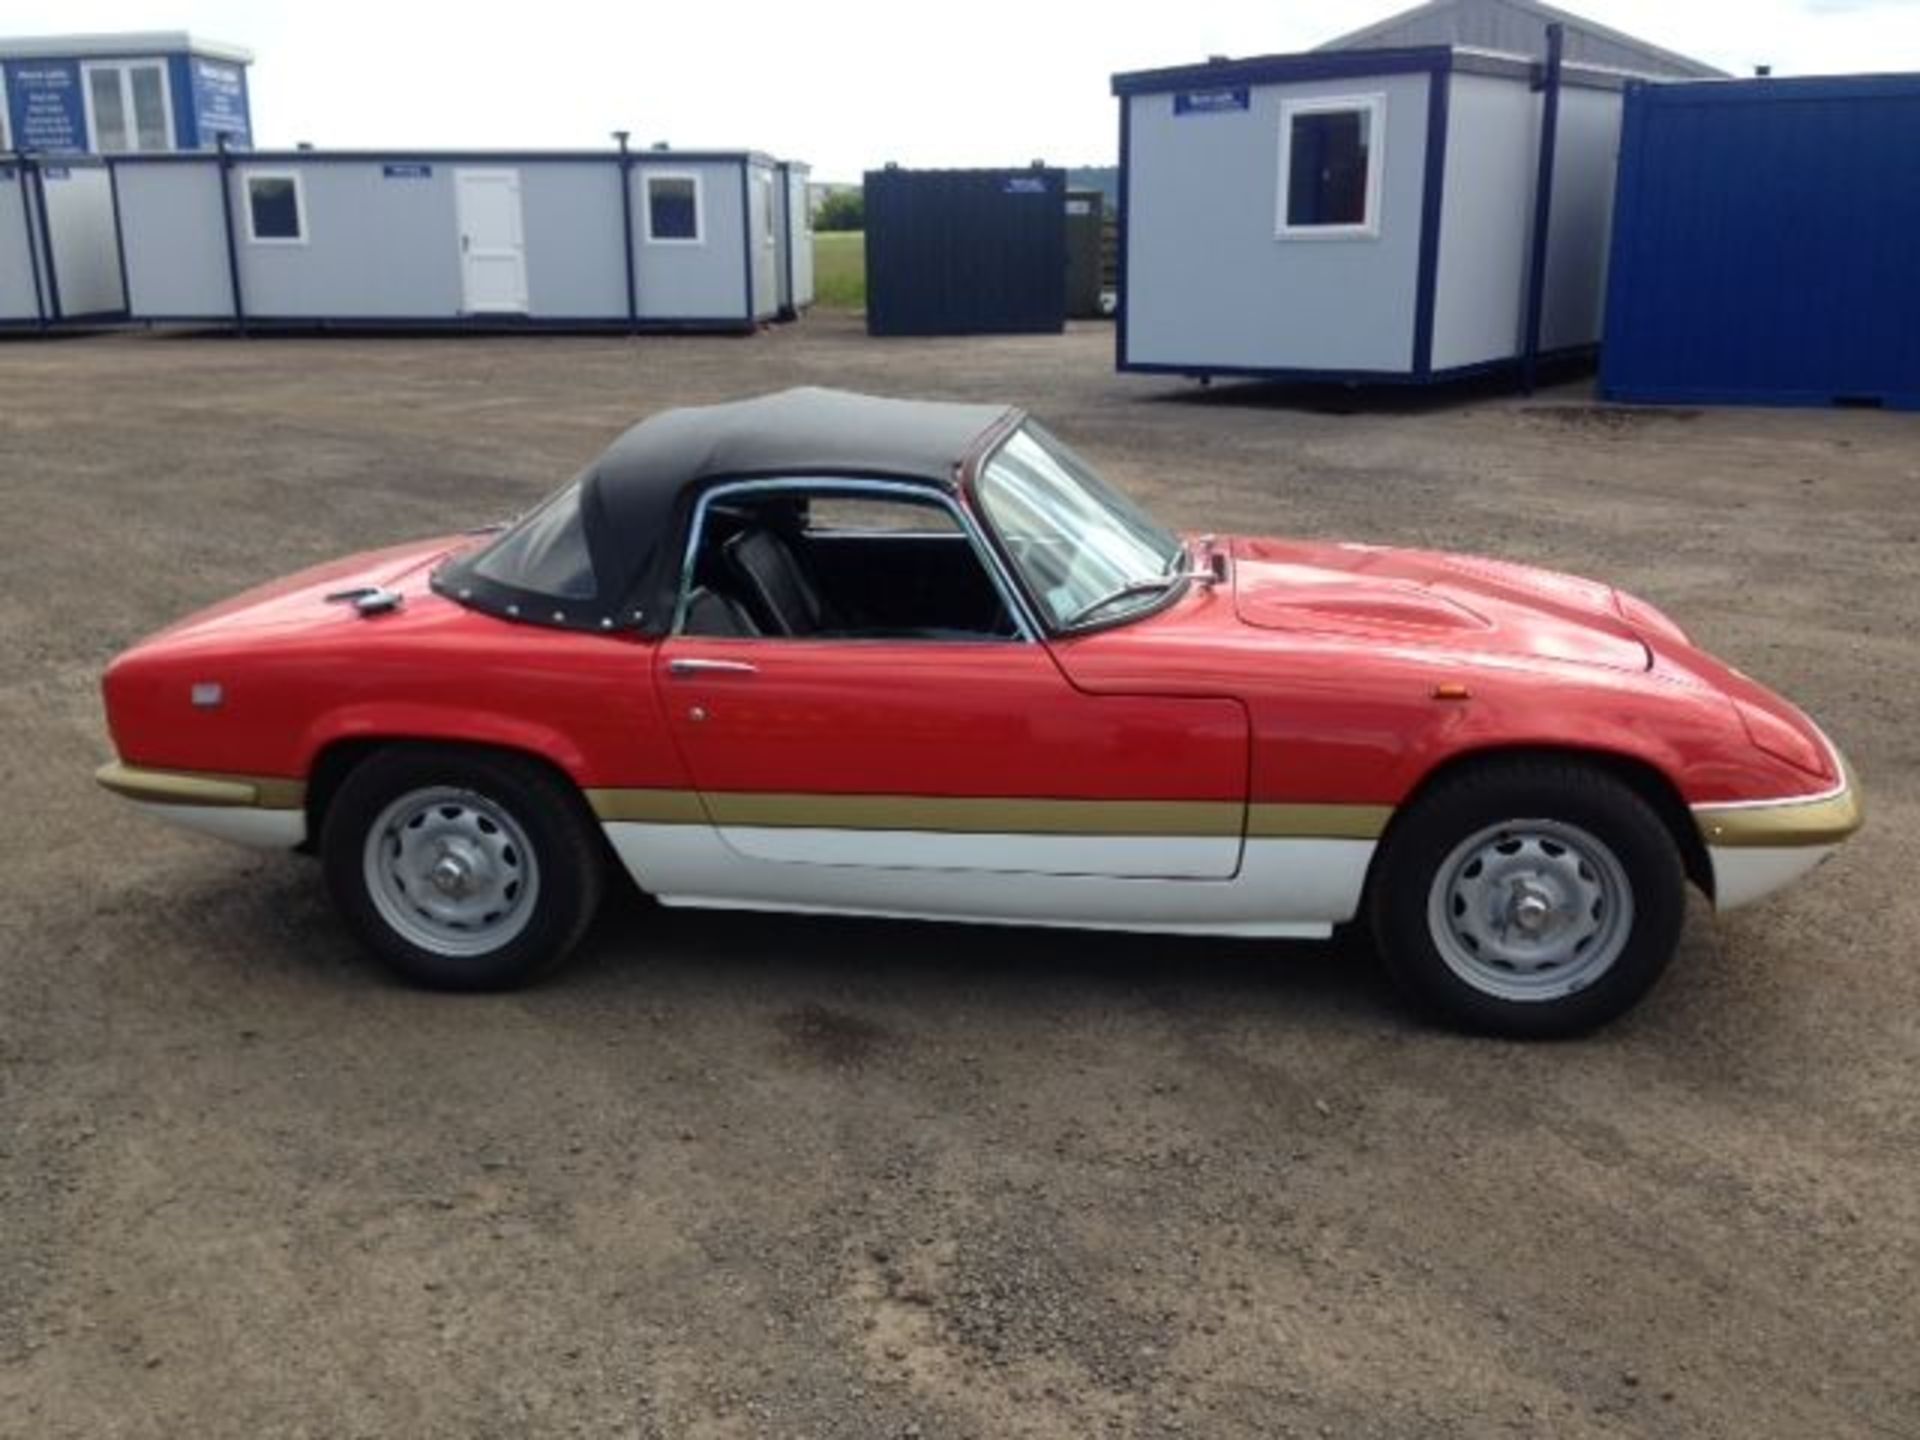 LOTUS, ELAN SERIES 4 - 1588cc, Chassis number 7002050018C - presented with an MOT test certificate - Image 6 of 7